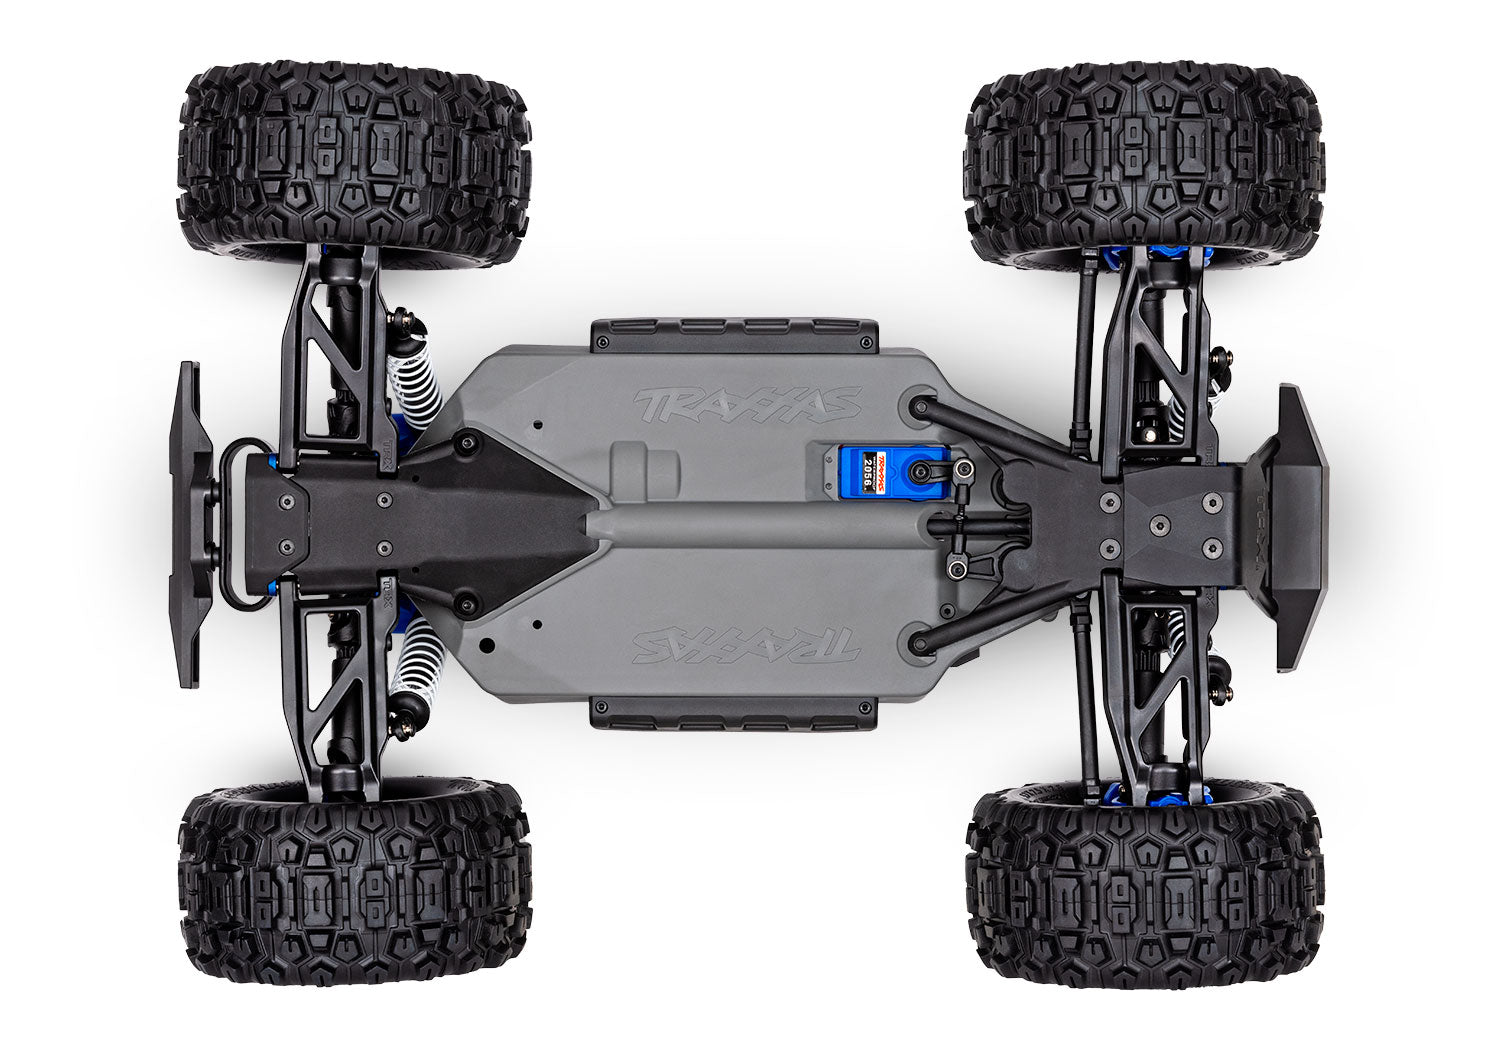 67154-4 Green Stampede 4X4® Brushless: 1/10-scale 4WD Monster Truck with TQ™ 2.4GHz Radio System